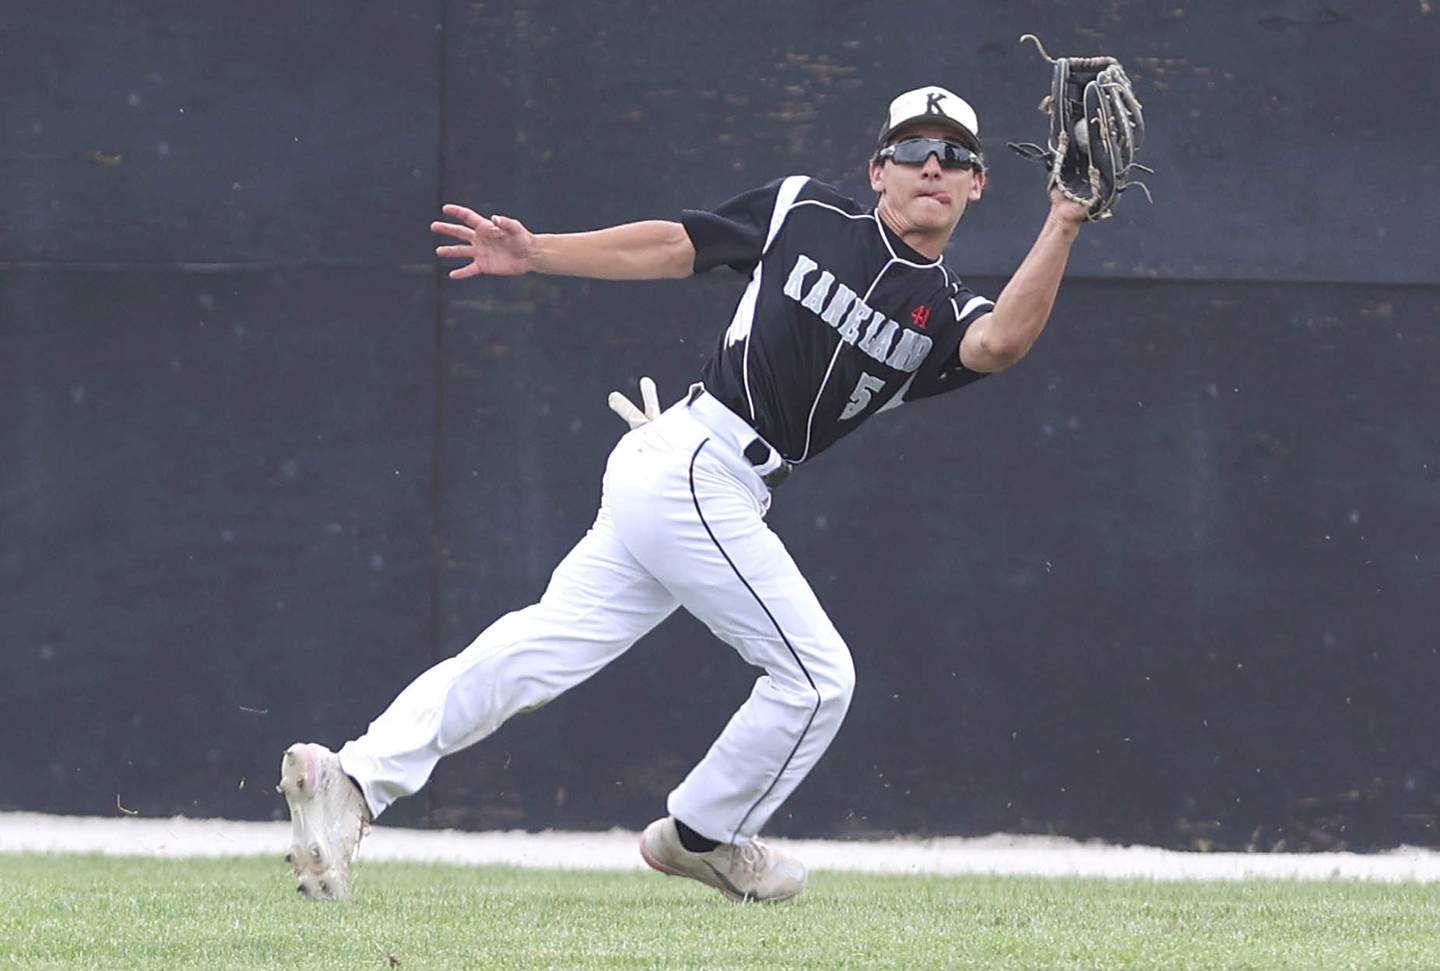 Kaneland's Alex Panico makes a catch in the outfield Saturday, June 4, 2022, during their IHSA Class 3A Sectional final game against Sycamore at the Sycamore Community Sports Complex.